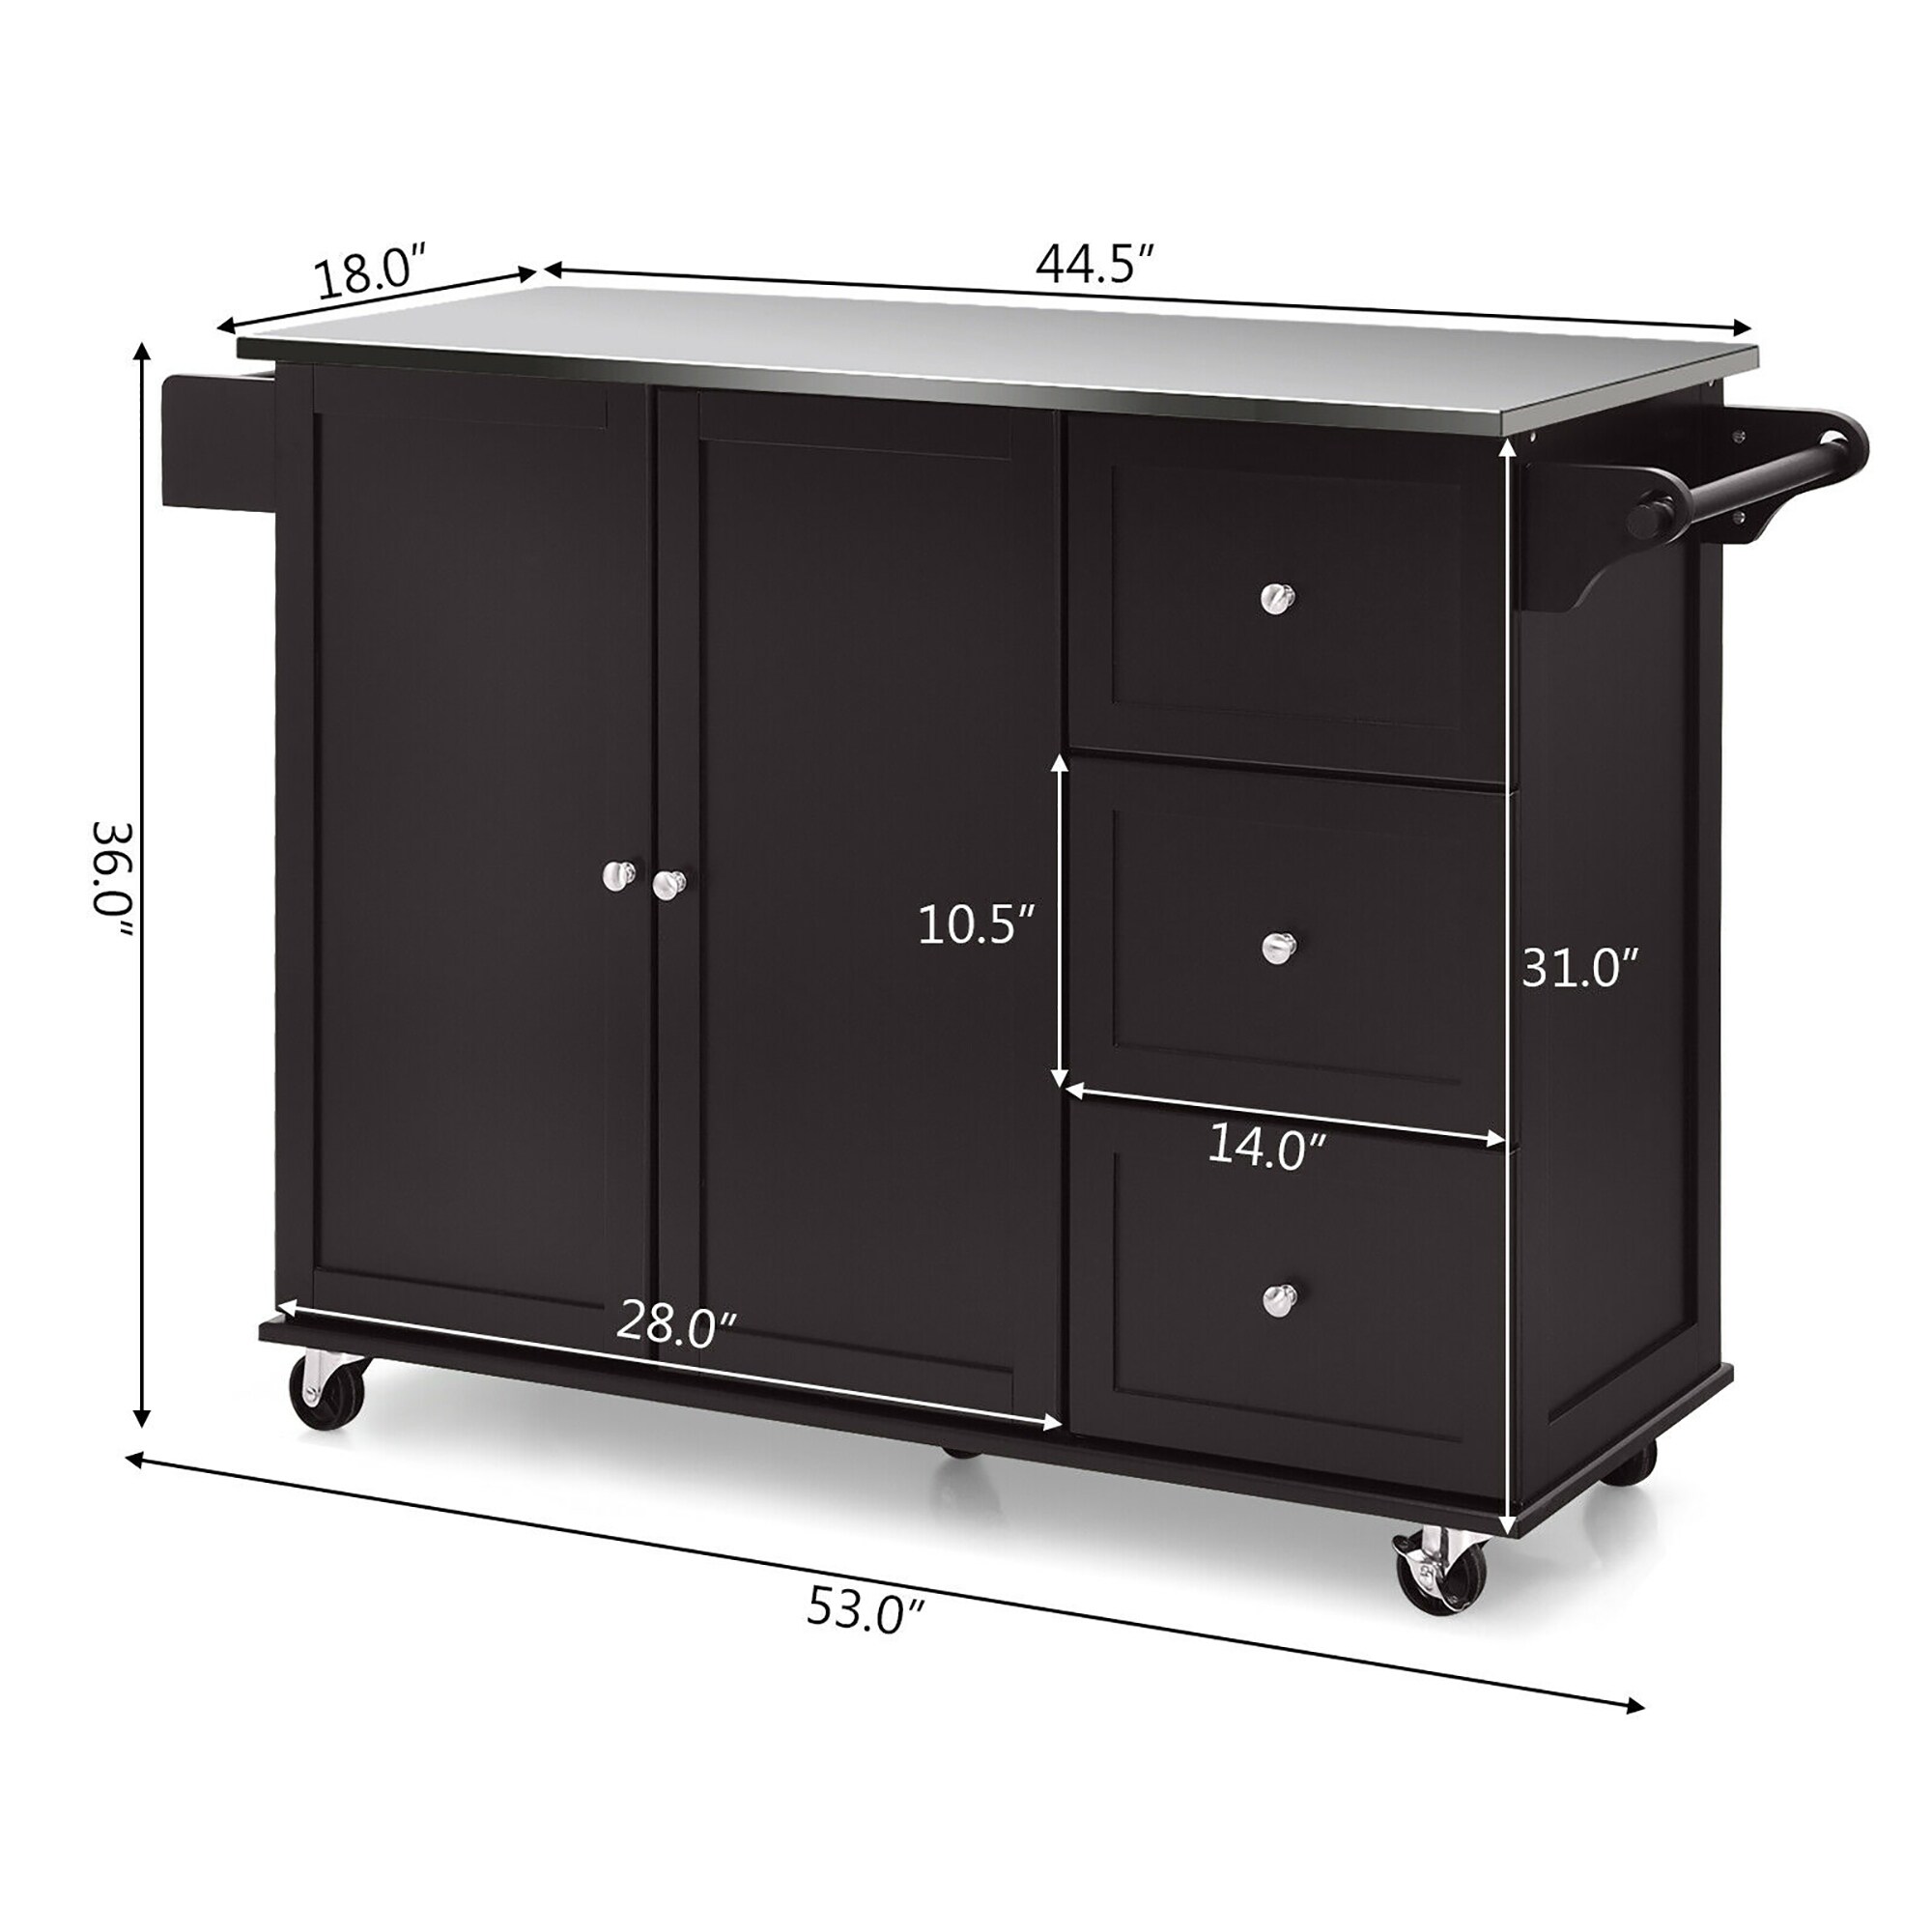 https://ak1.ostkcdn.com/images/products/is/images/direct/2fb5914be645f047c20b2c41975ab9d507efe168/Costway-Kitchen-Island-2-Door-Storage-Cabinet-Stainless-Steel-Top-w-.jpg